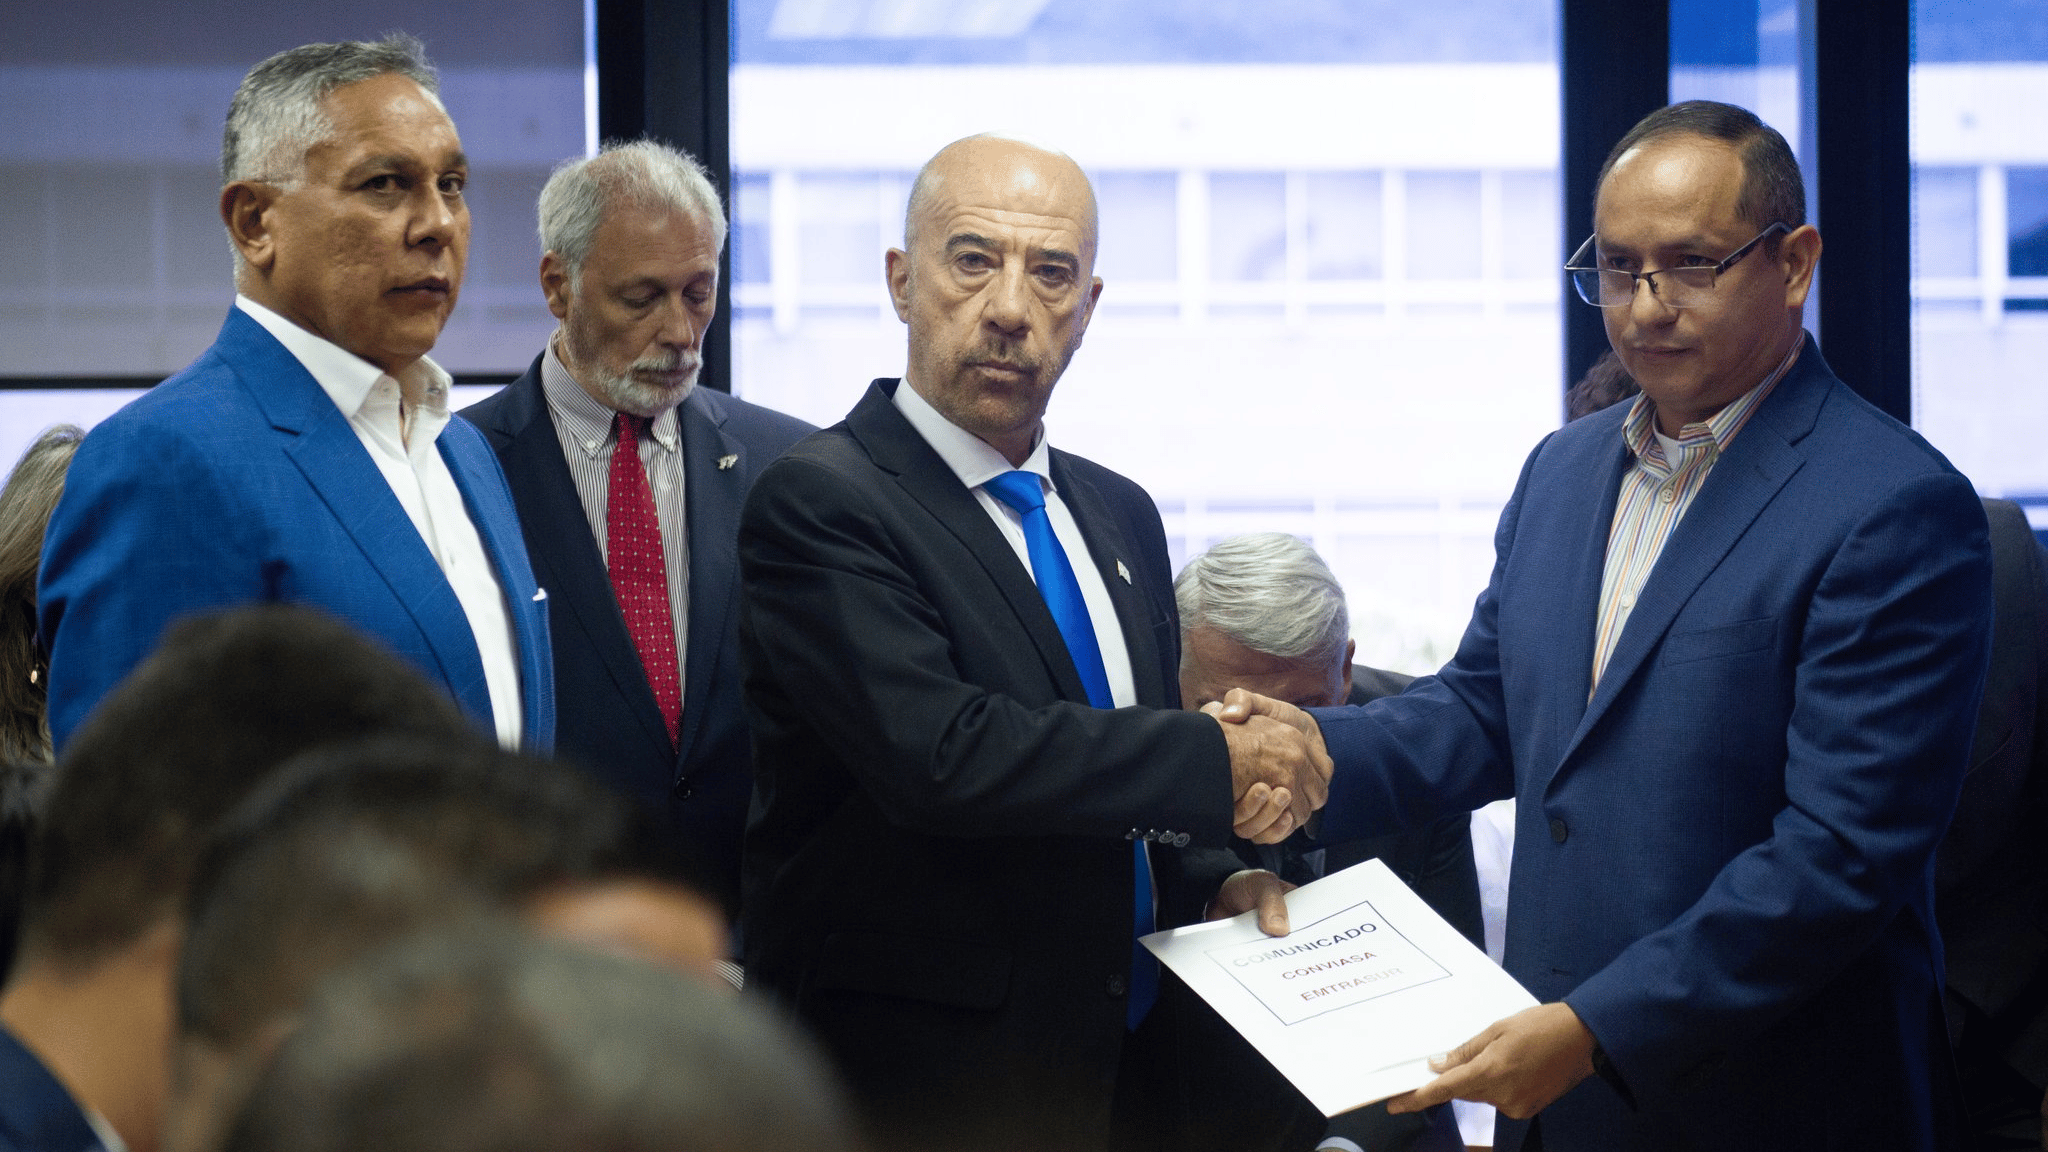 Venezuelan Deputy Pedro Carreño (left), Argentine Ambassador in Caracas Óscar Laborde (center front) and Venezuelan Minister for Transport Ramón Velásquez (right) at the moment when a parliamentary agreement condemning the hijacking of the Venezuelan Boeing 747-300 by Argentine authorities was presented to the Argentine official. Photo: Infobae.